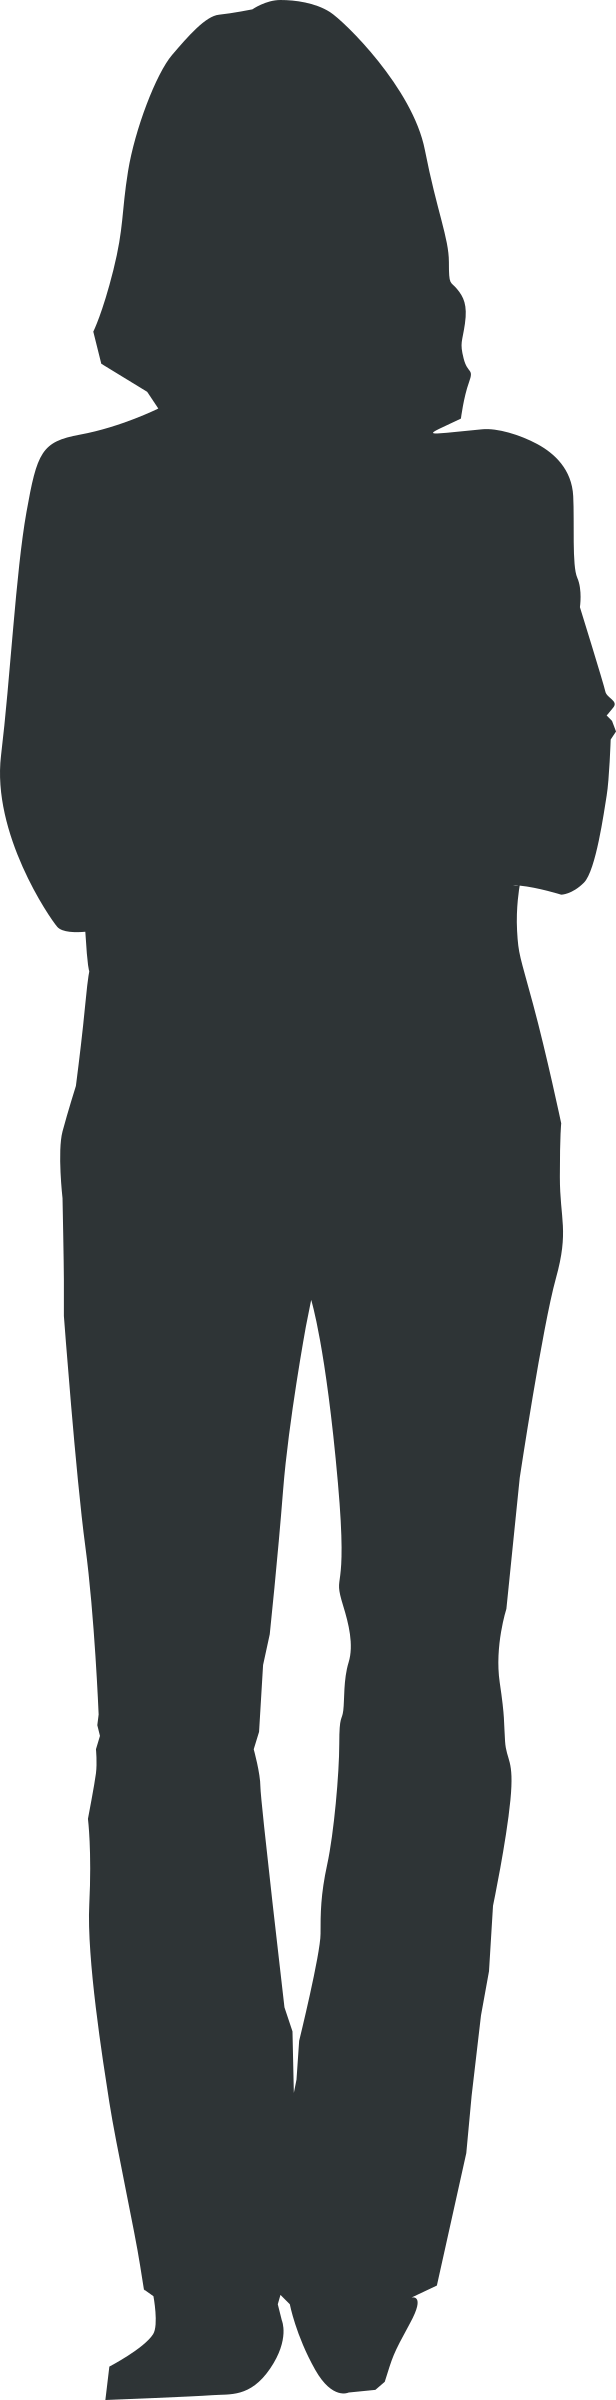 Clipart clothes person. Outline template datariouruguay 